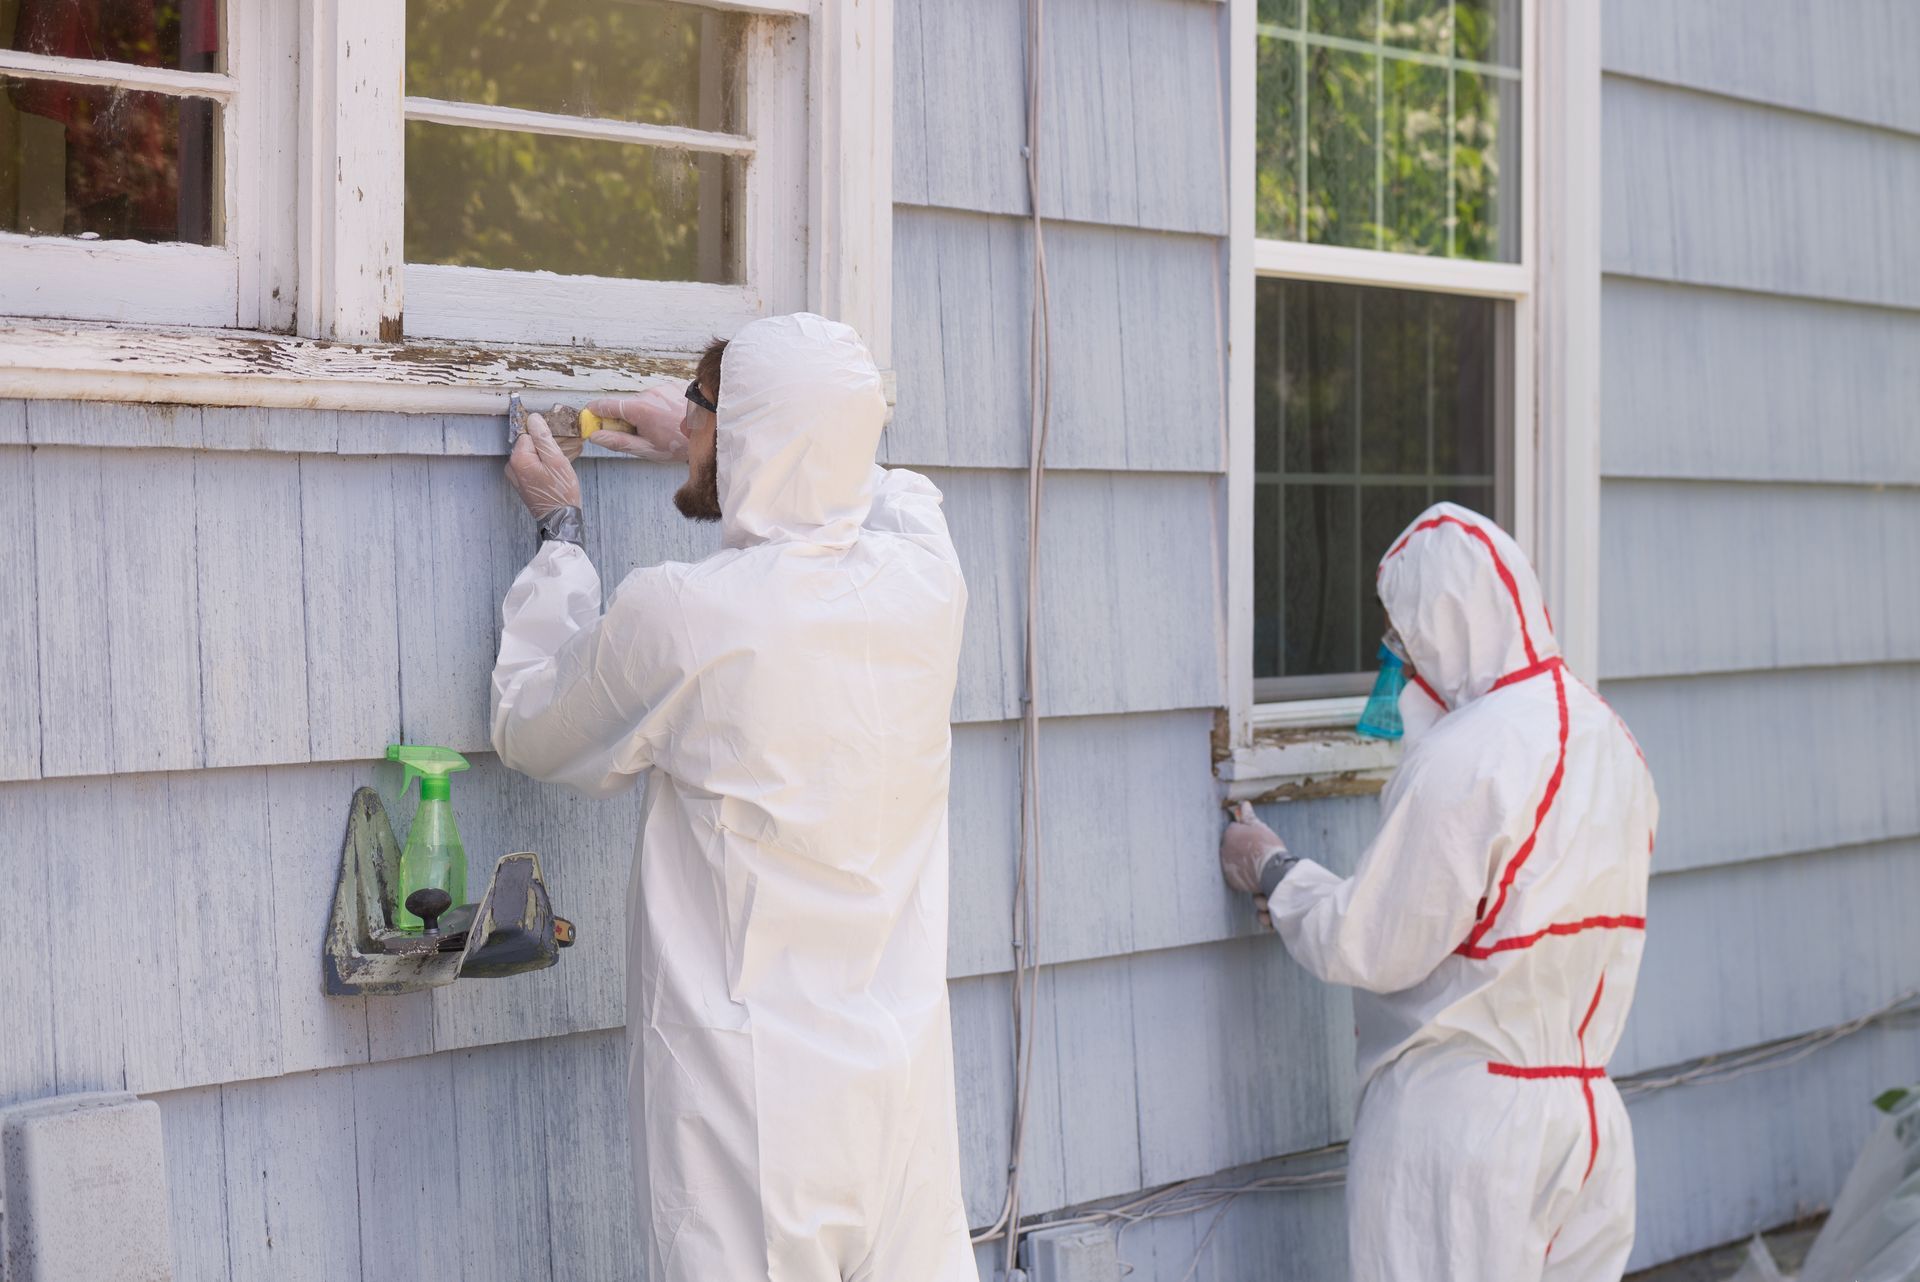 Two men in protective suits are working on the side of a house.